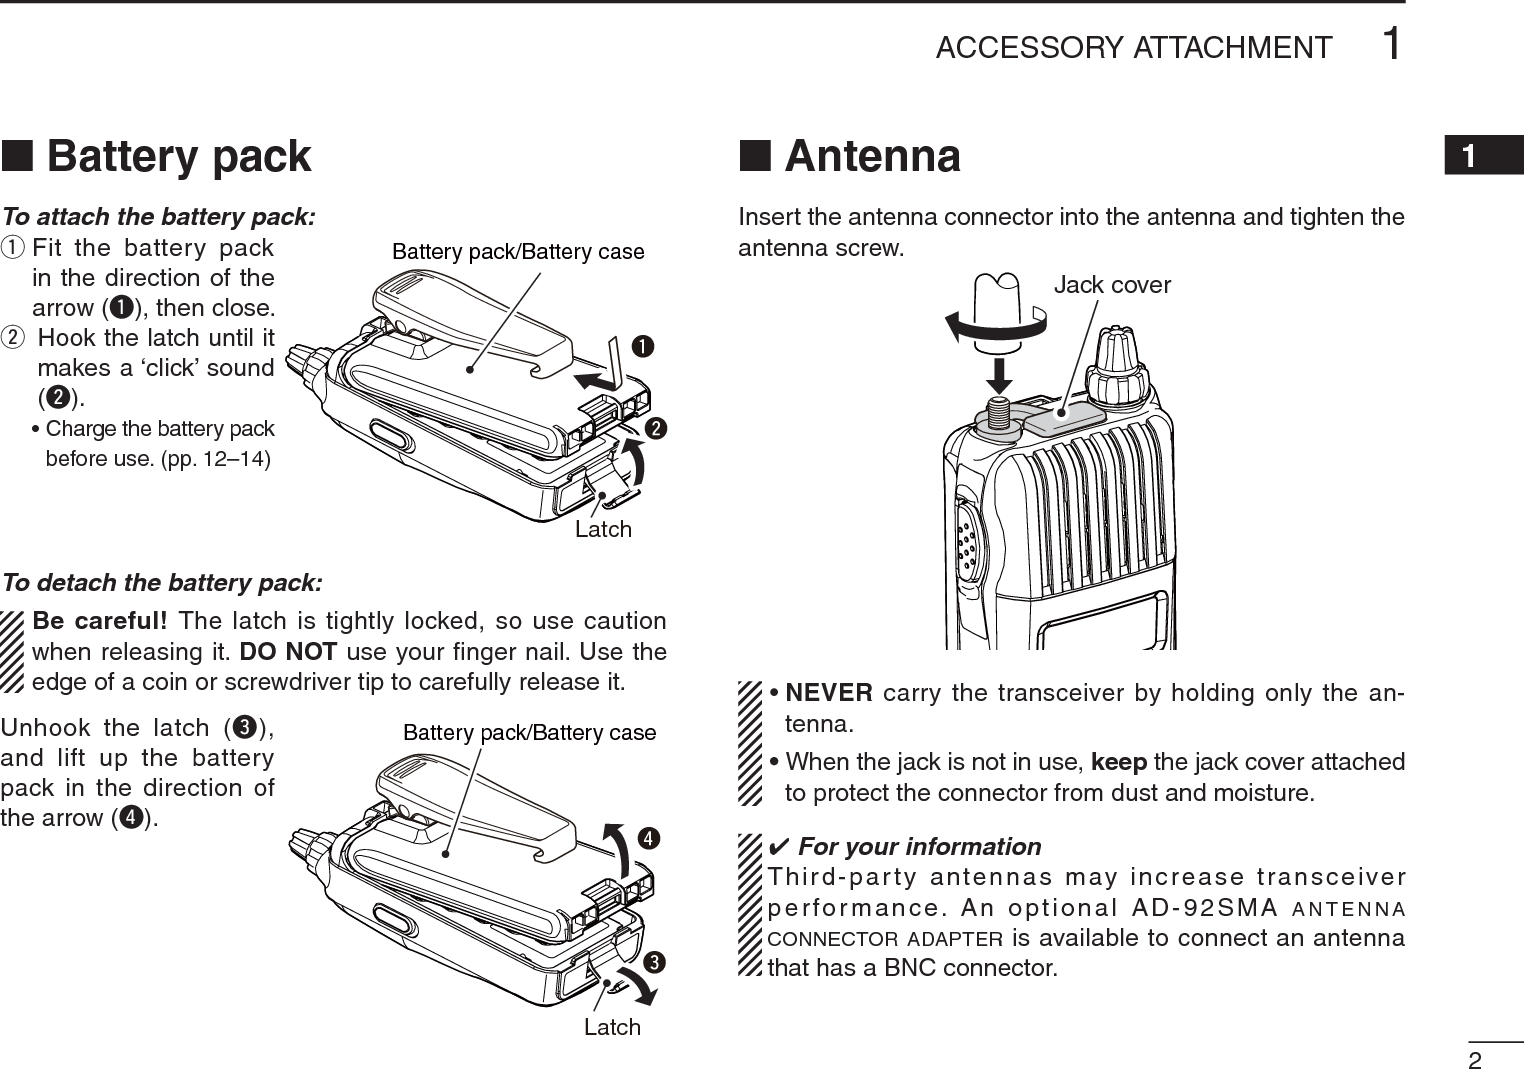 21ACCESSORY ATTACHMENT12345678910111213141516171819N Battery packTo attach the battery pack:qFit the battery pack in the direction of the arrow (q), then close.wHook the latch until it makes a ‘click’ sound (w).• Charge the battery pack before use. (pp. 12–14)To detach the battery pack:Be careful! The latch is tightly locked, so use caution when releasing it. DO NOT use your ﬁnger nail. Use the edge of a coin or screwdriver tip to carefully release it.Unhook the latch (e), and lift up the battery pack in the direction of the arrow (r).N AntennaInsert the antenna connector into the antenna and tighten the antenna screw.Jack cover•NEVER carry the transceiver by holding only the an-tenna.•When the jack is not in use, keep the jack cover attached to protect the connector from dust and moisture. For your informationThird-party antennas may increase transceiver performance. An optional AD-92SMA ANTENNACONNECTOR ADAPTER is available to connect an antenna that has a BNC connector.wqLatchBattery pack/Battery caseerLatchBattery pack/Battery case